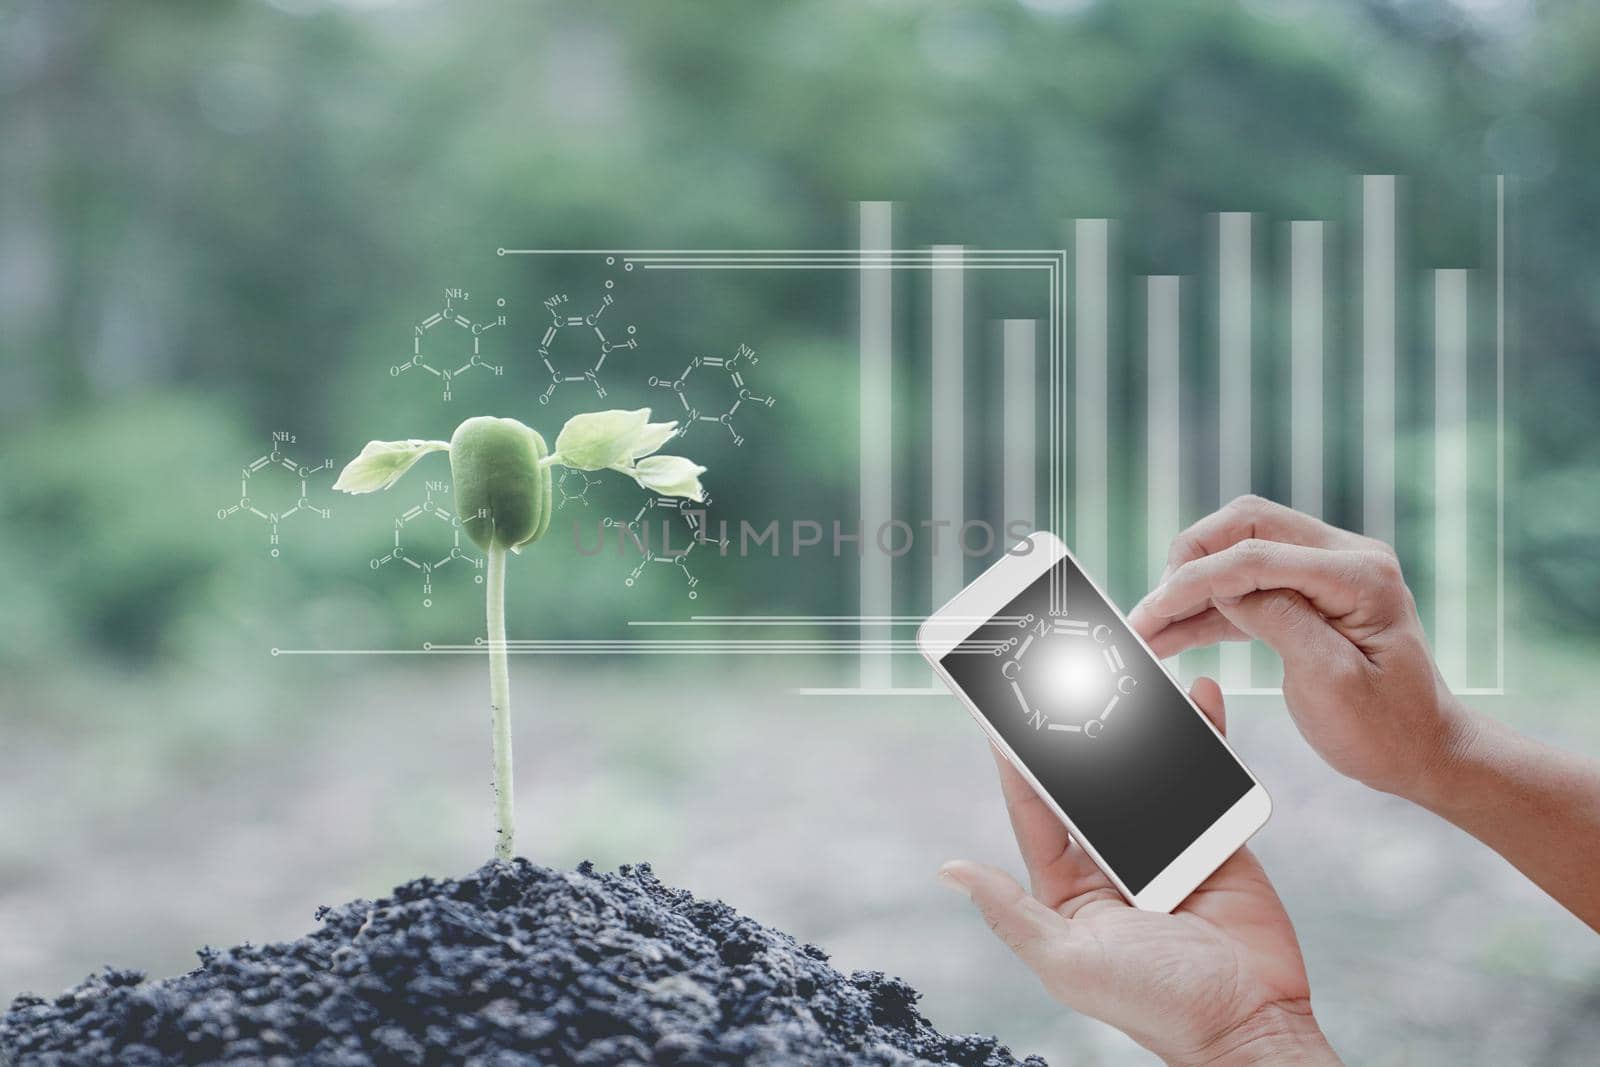 Innovation technology for smart biology, Bio, system, Agriculture management tree plants seeding, Young man hand holding smartphone with smart technology concept.  by yodsawai